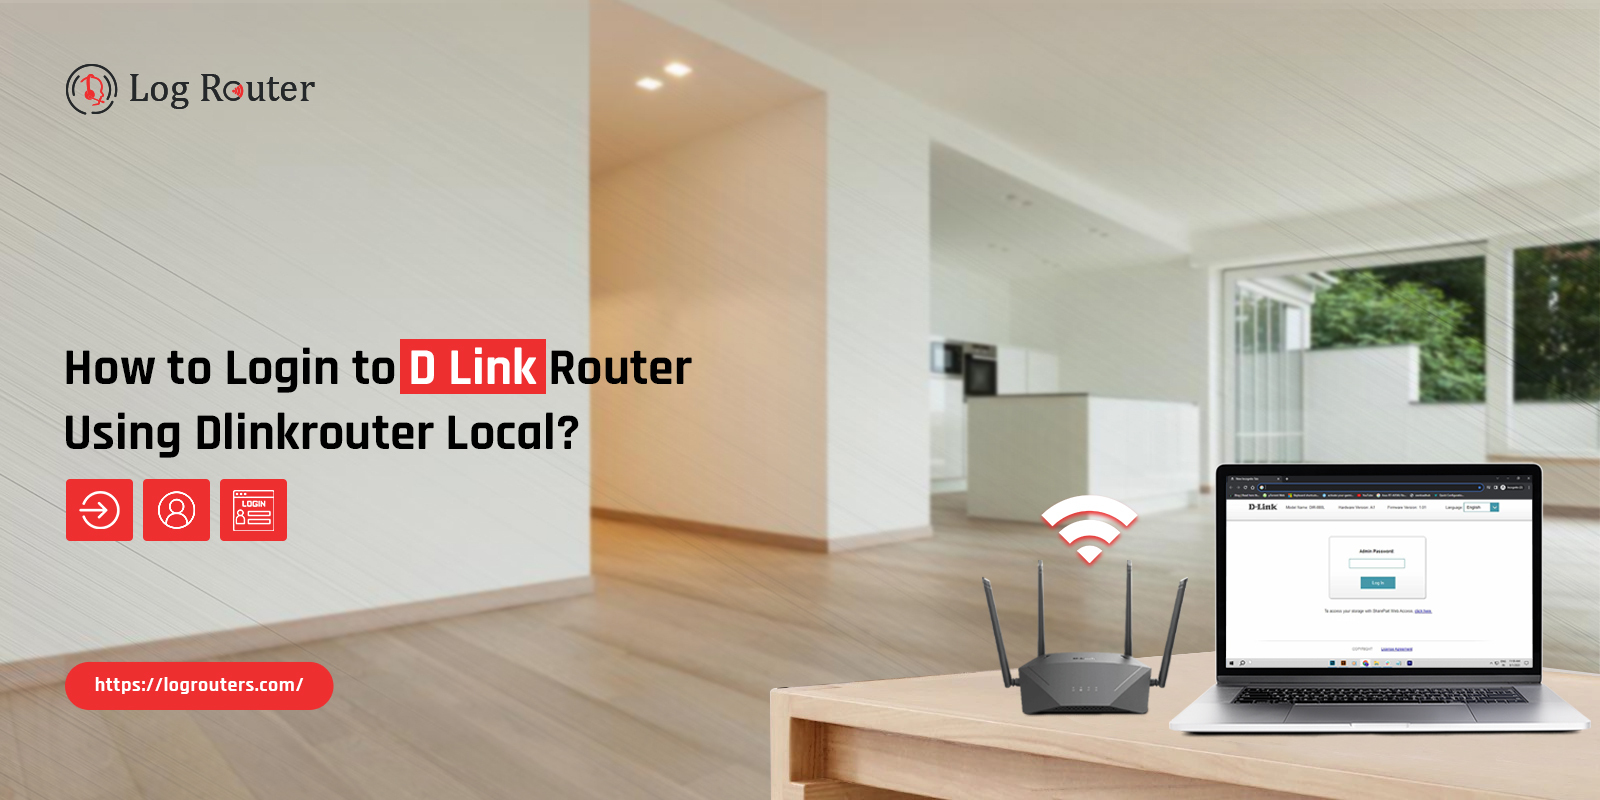 How to Login to D Link Router Using Dlinkrouter Local?